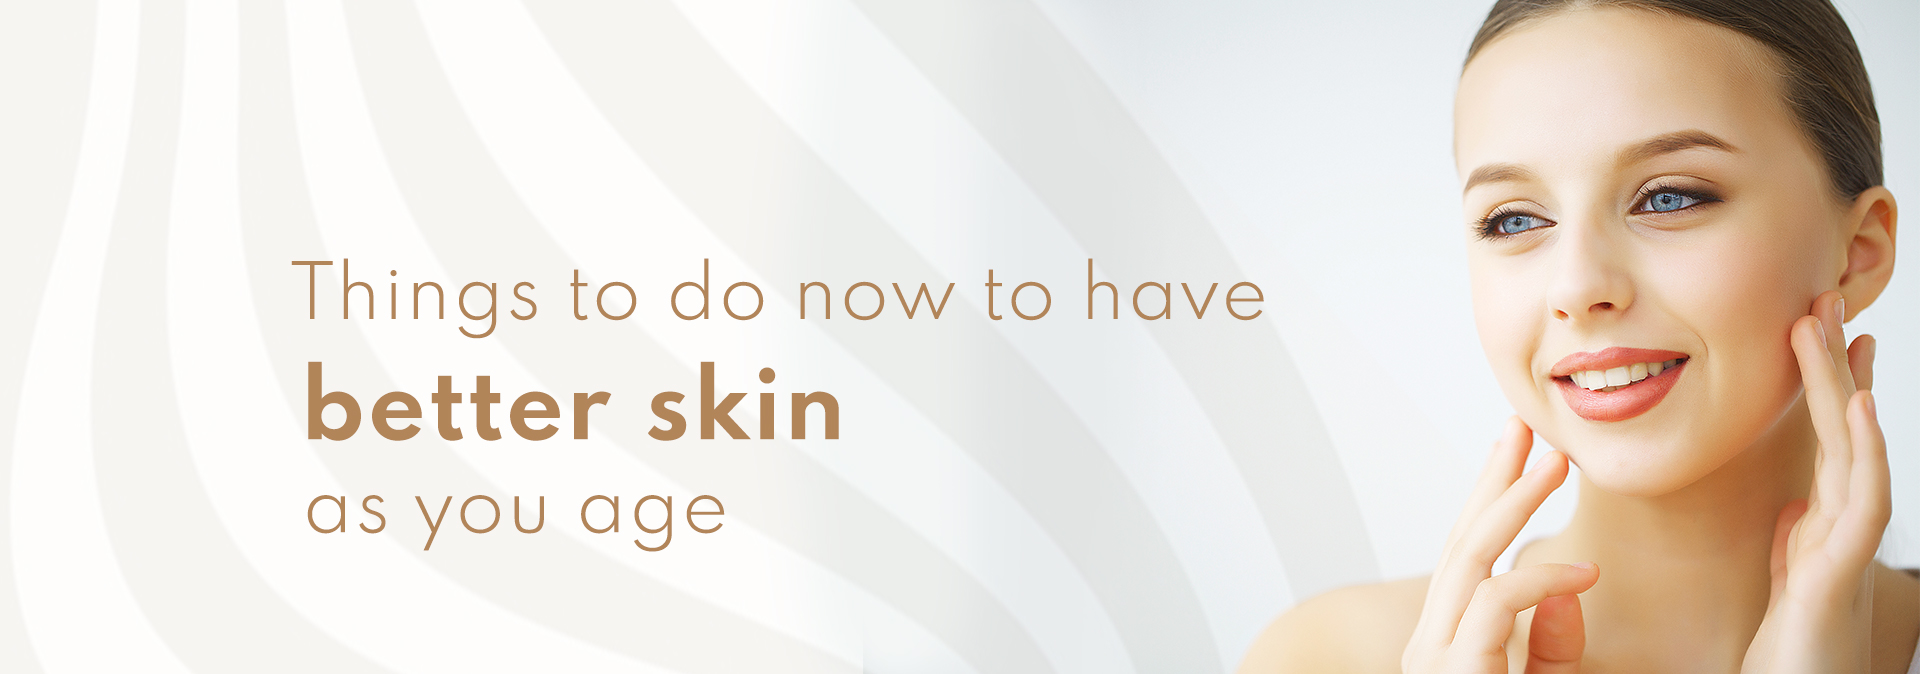 things-to-do-now-to-have-better-skin-as-your-age